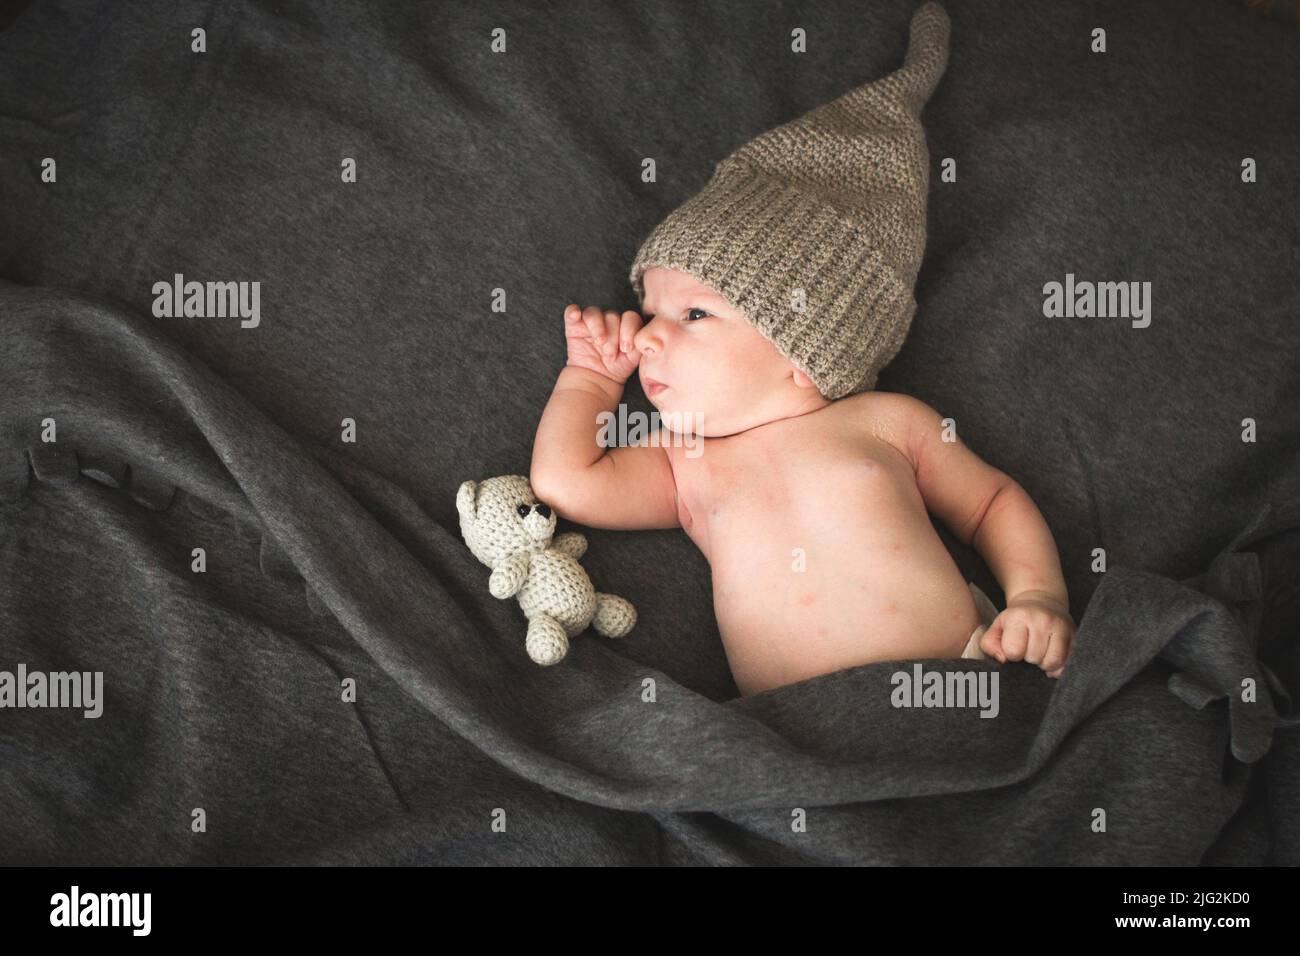 newborn baby with a toy lying next to the knitted teddy bear. Stock Photo